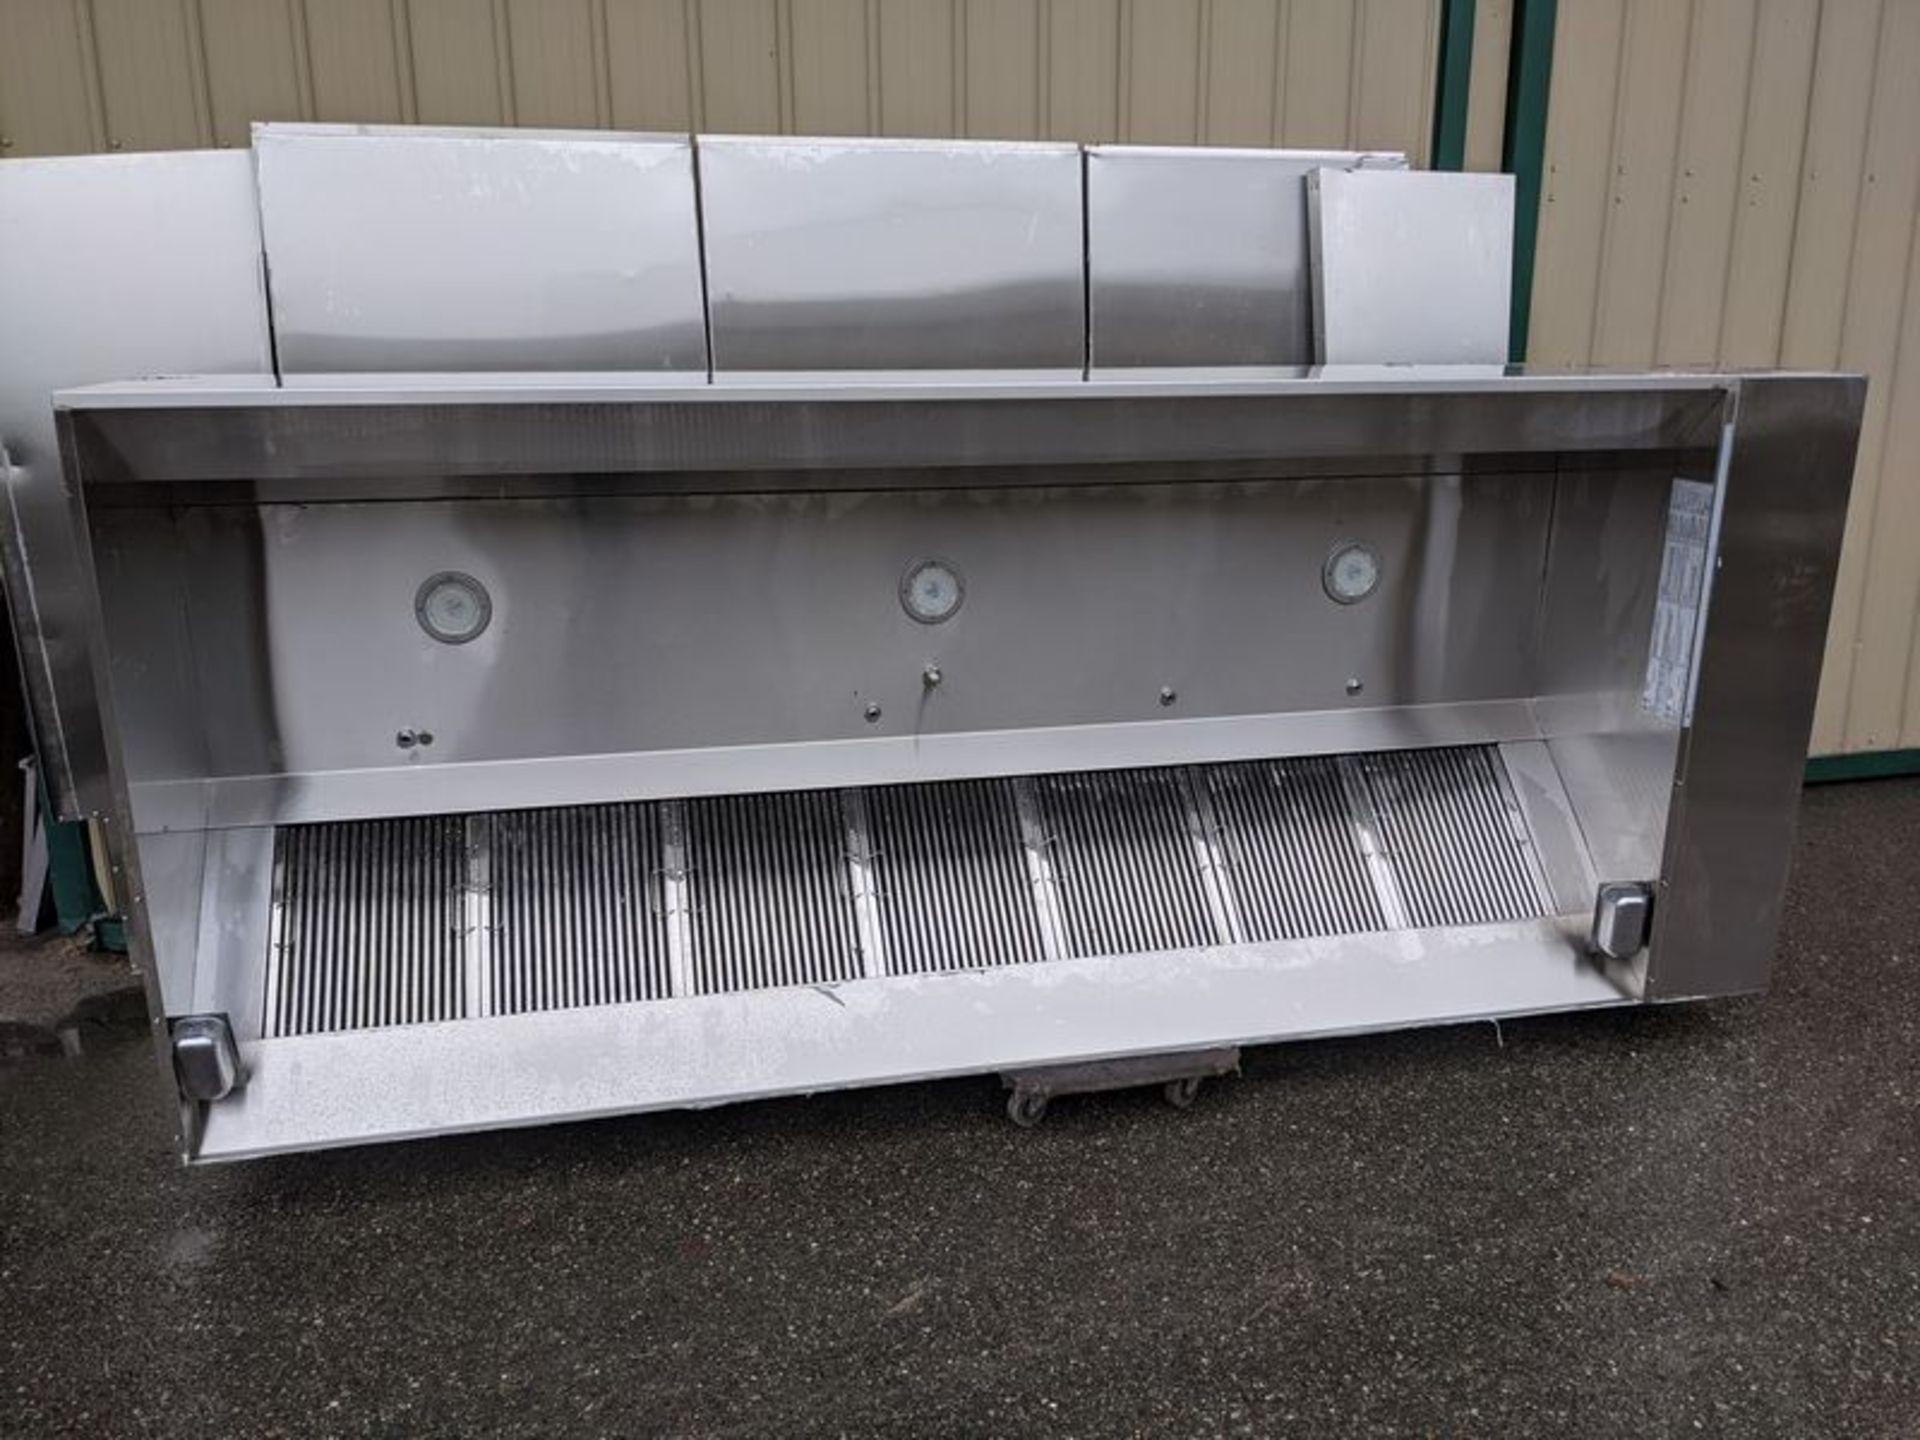 Captive Air 10 Foot Stainless Steel Canopy with Fire Suppression Make Up Air, Backsplash & Fan